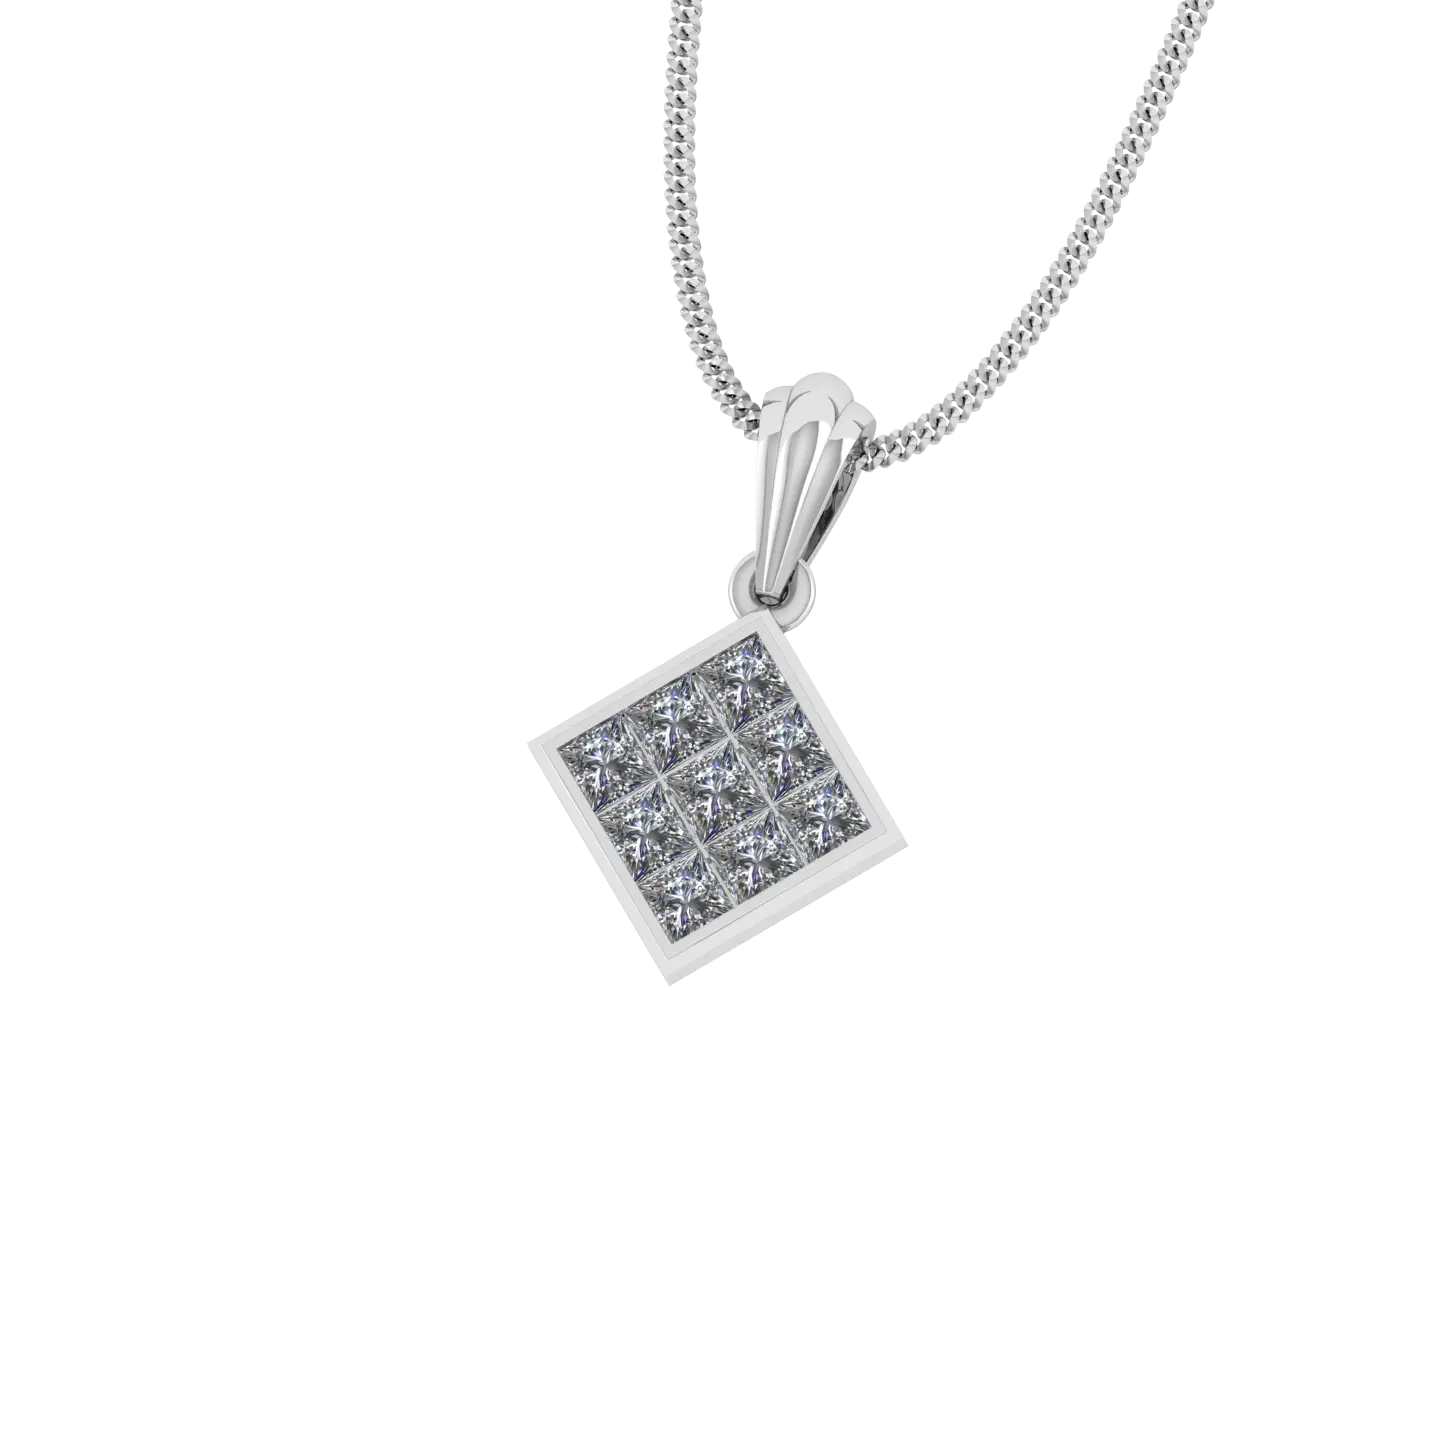 Best Product 14K White Gold trendy Design Square Shape Diamond Necklace Set Charm Pendant with stud for Women at Factory Price